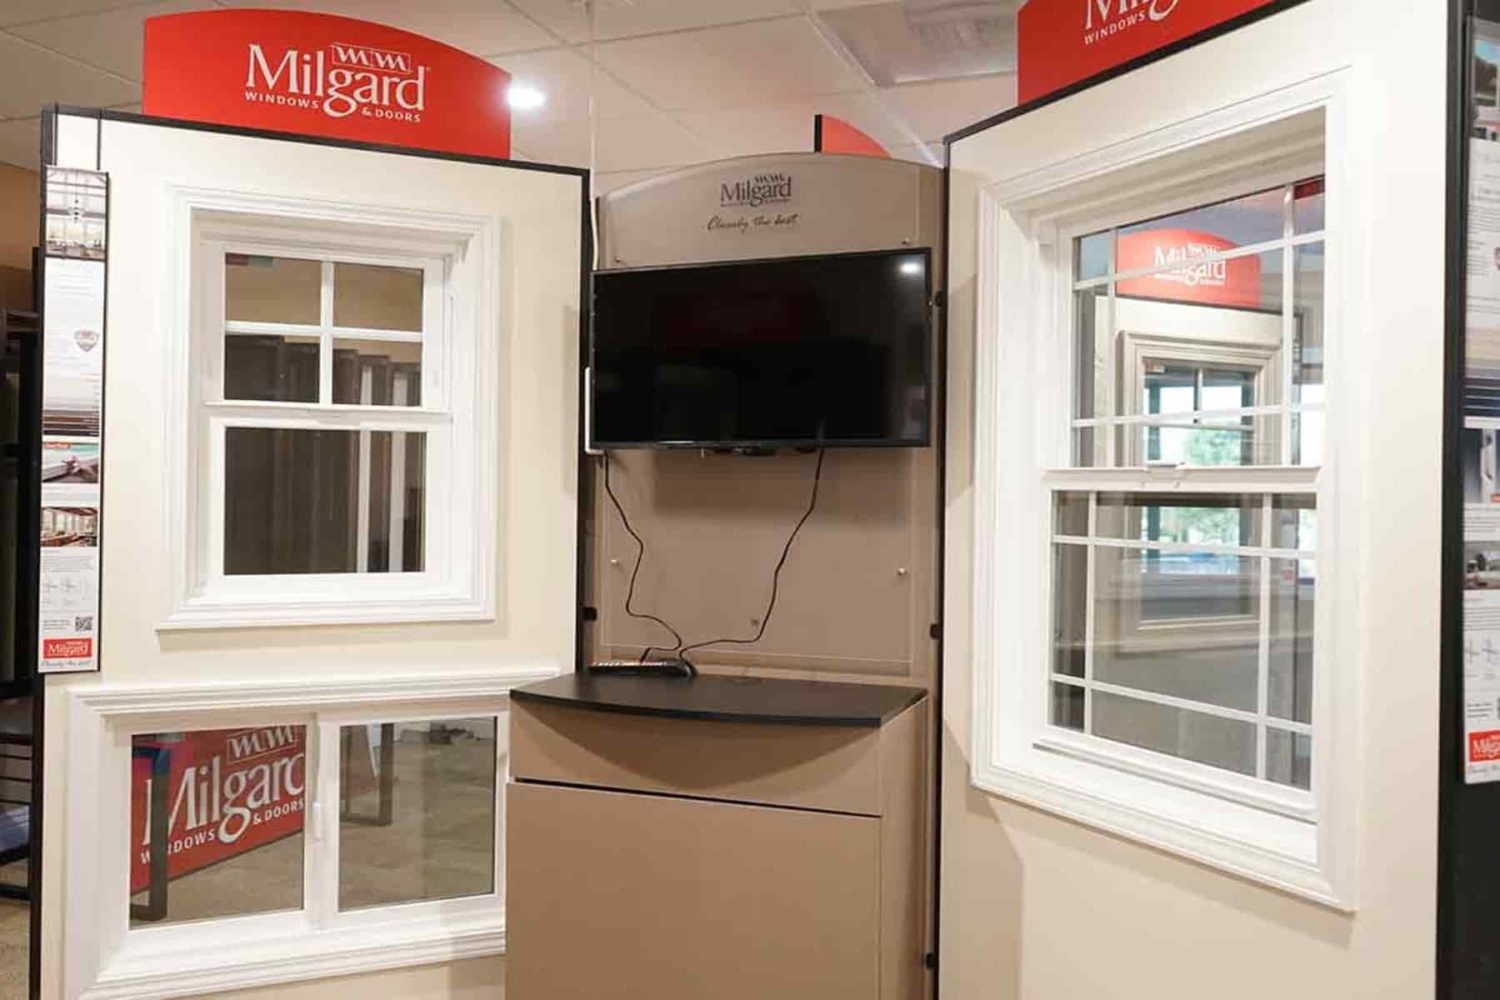 Milgard windows available in our showroom